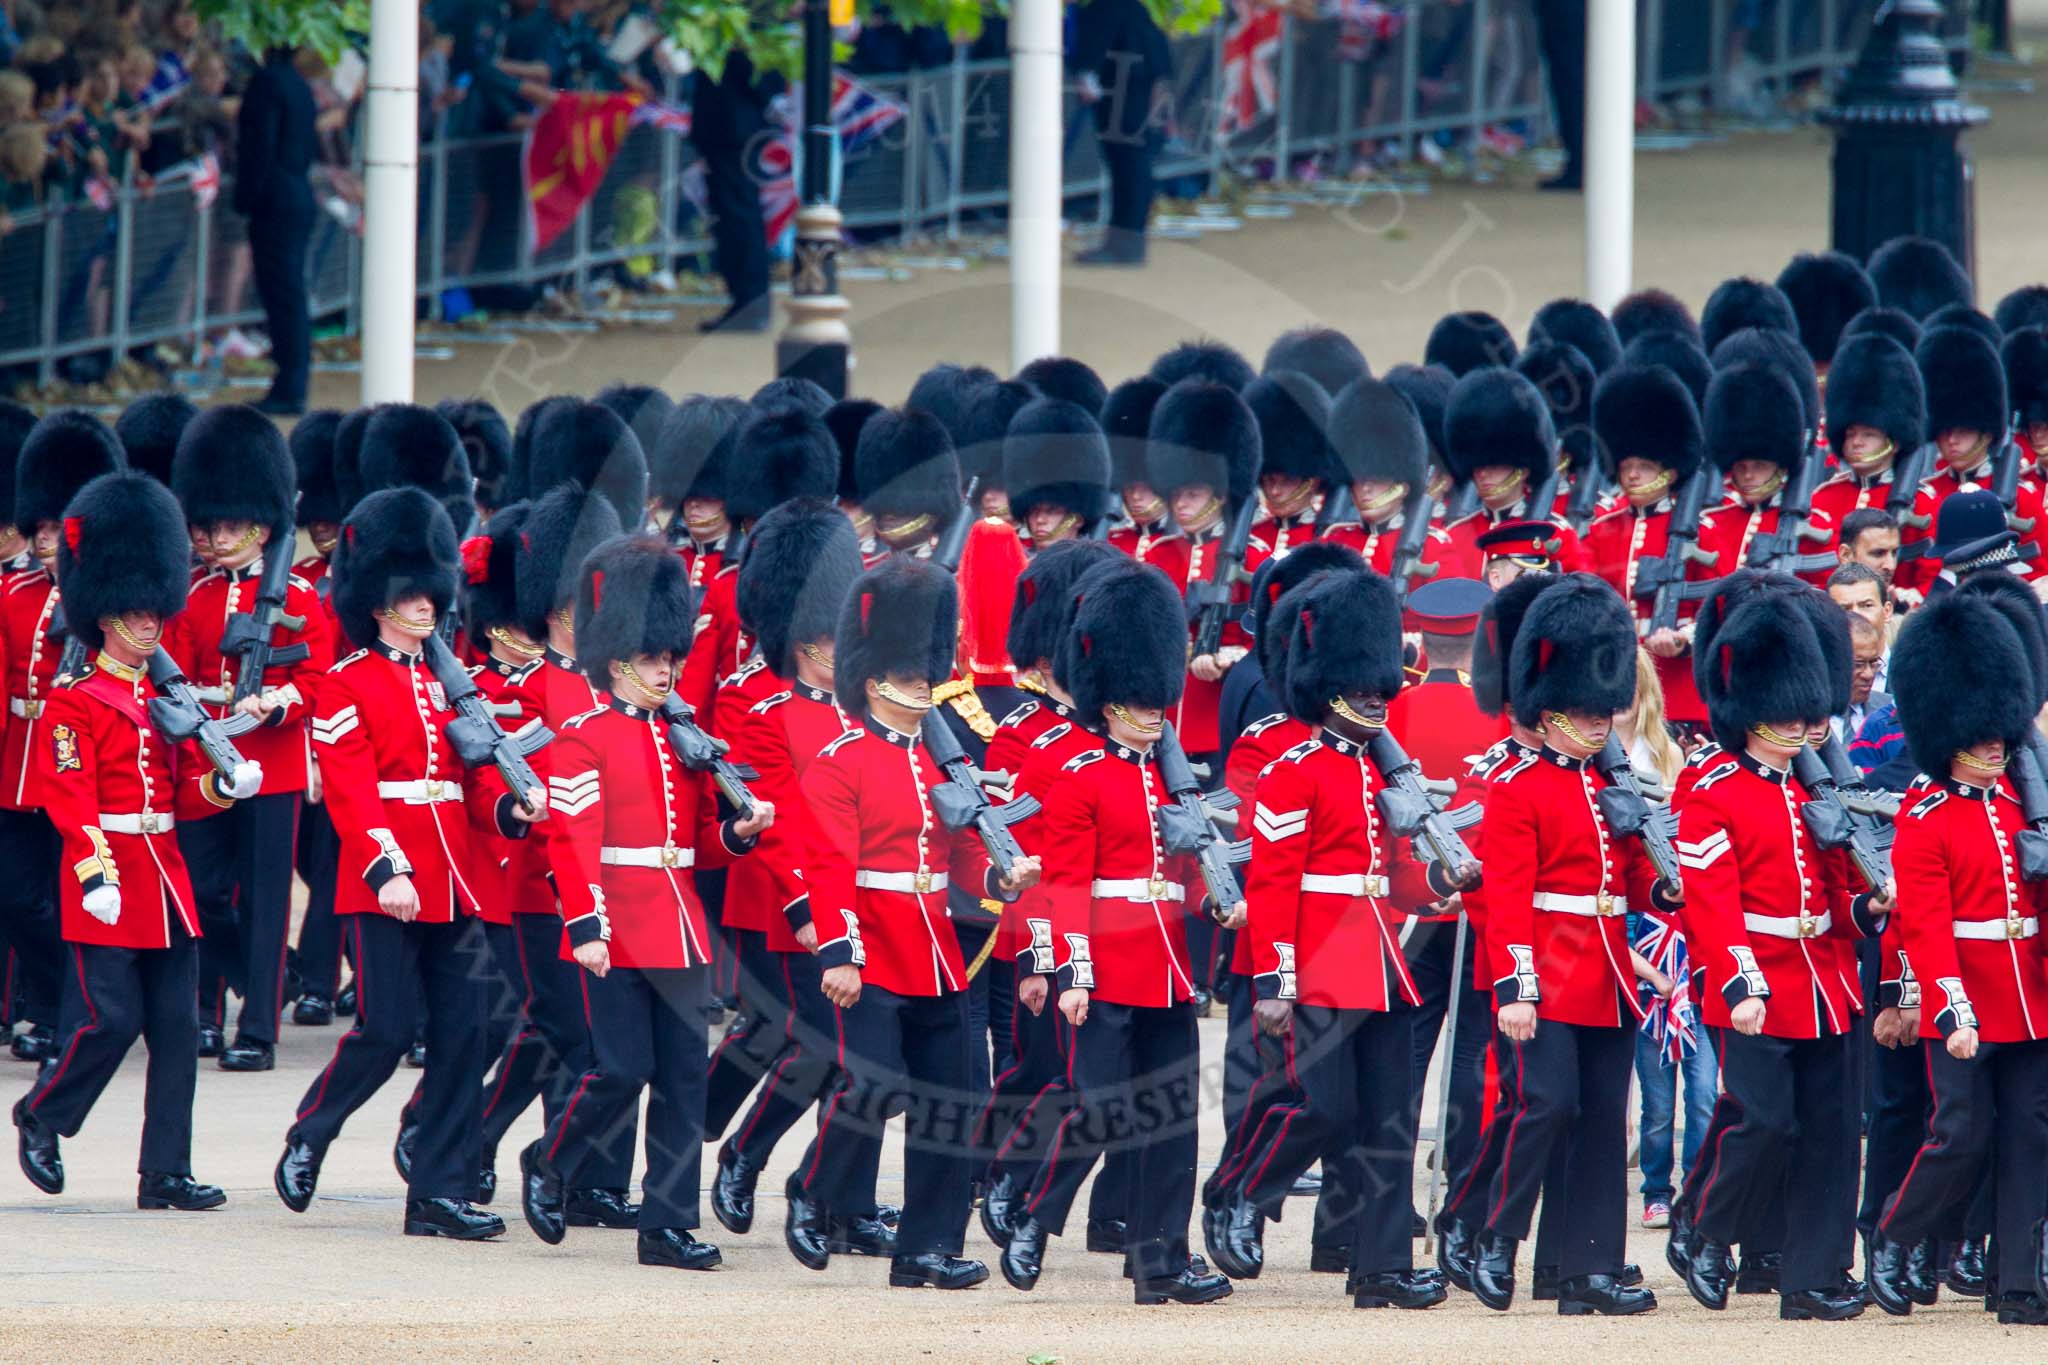 Trooping the Colour 2014.
Horse Guards Parade, Westminster,
London SW1A,

United Kingdom,
on 14 June 2014 at 10:24, image #122